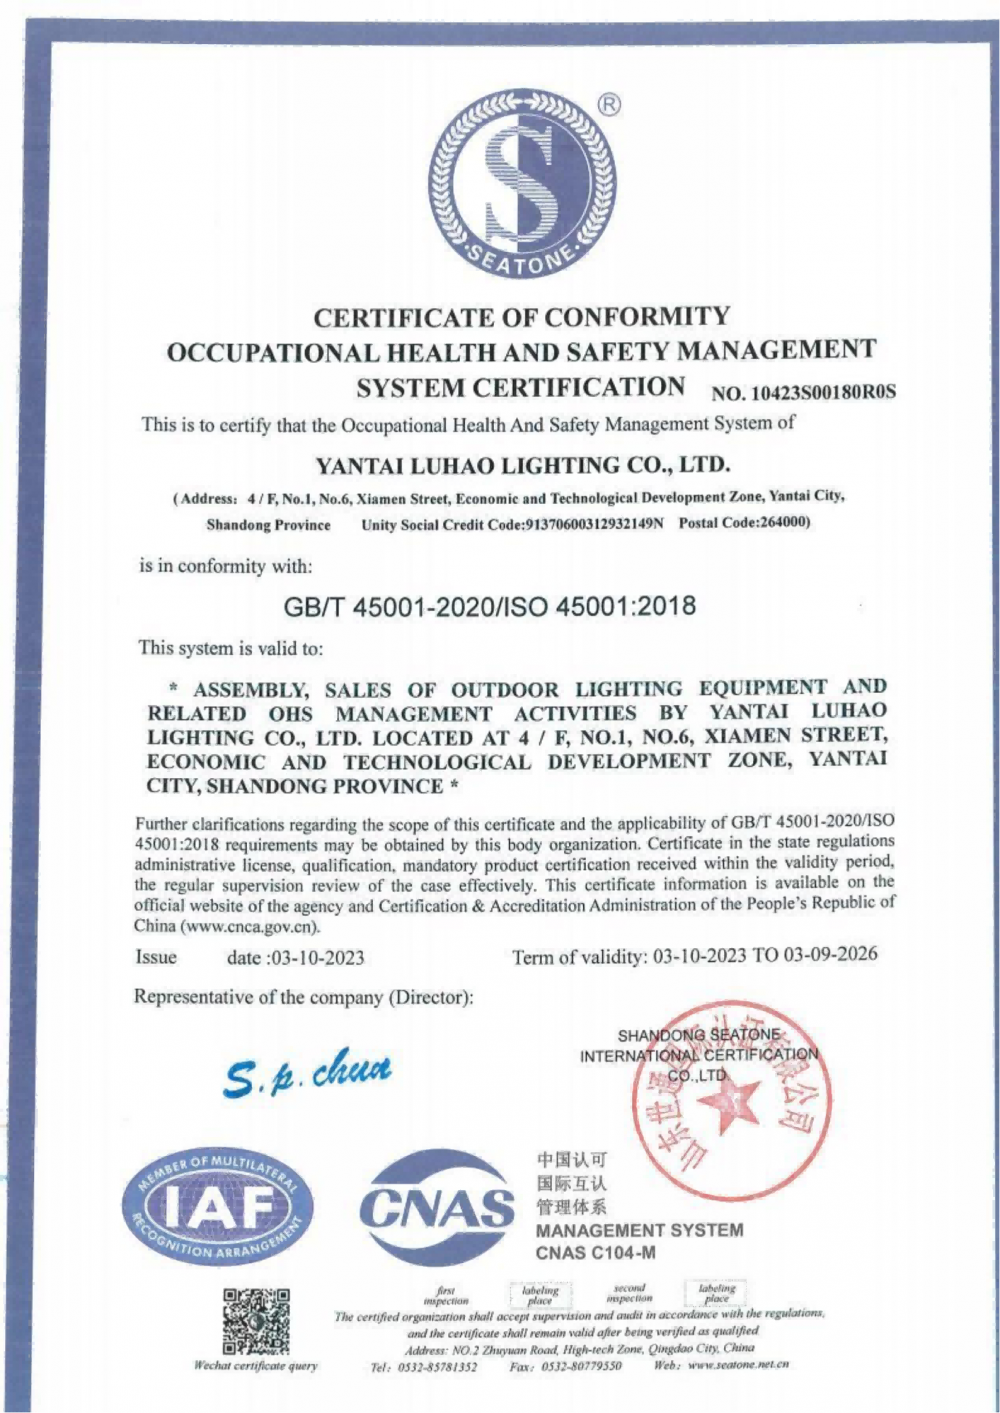 CERTIFICATE OF CONFORMITY OCCUPATIONAL HEALTH AND SAFETY  MANAGEMENT SYSTEM CERTIFICATION